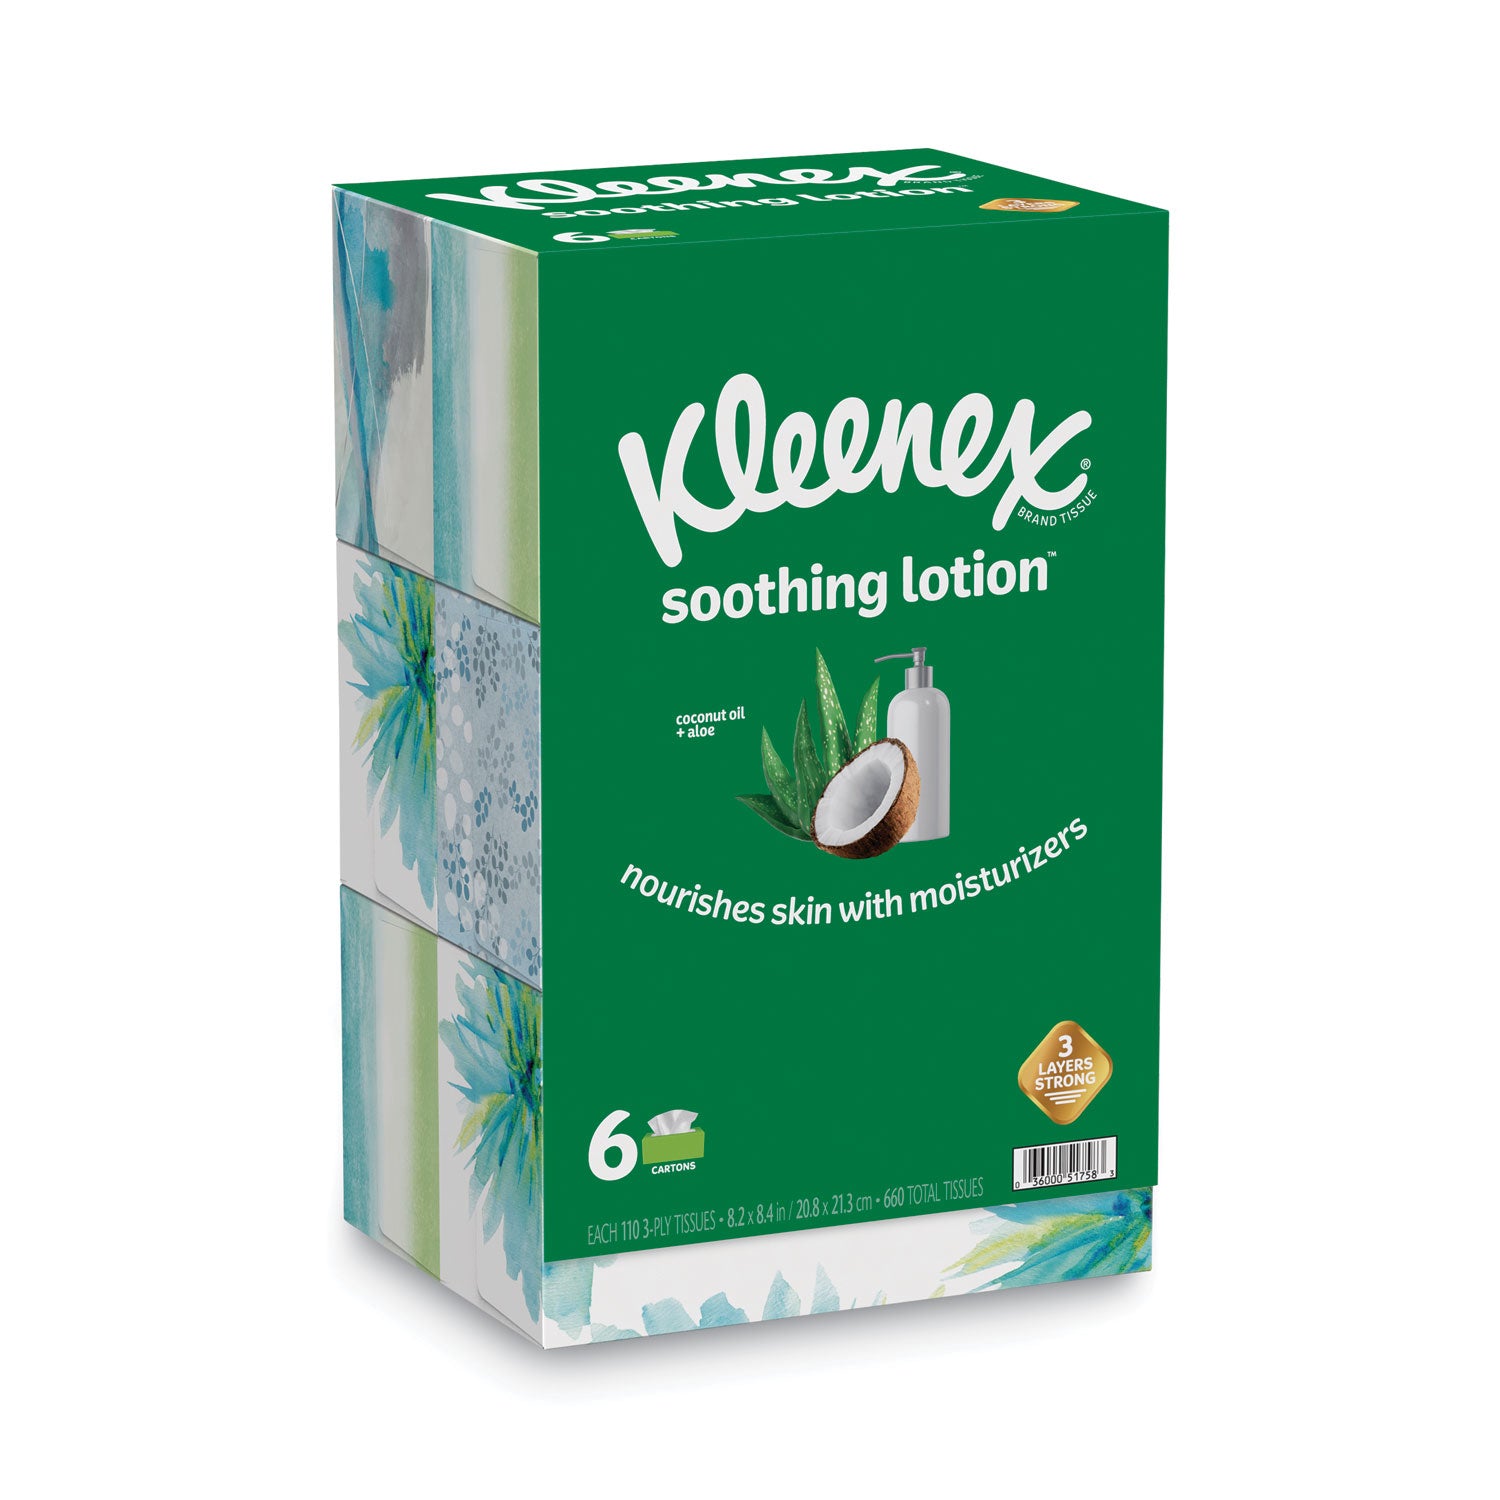 lotion-facial-tissue-3-ply-white-110-sheets-box-6-boxes-pack_kcc51758 - 3